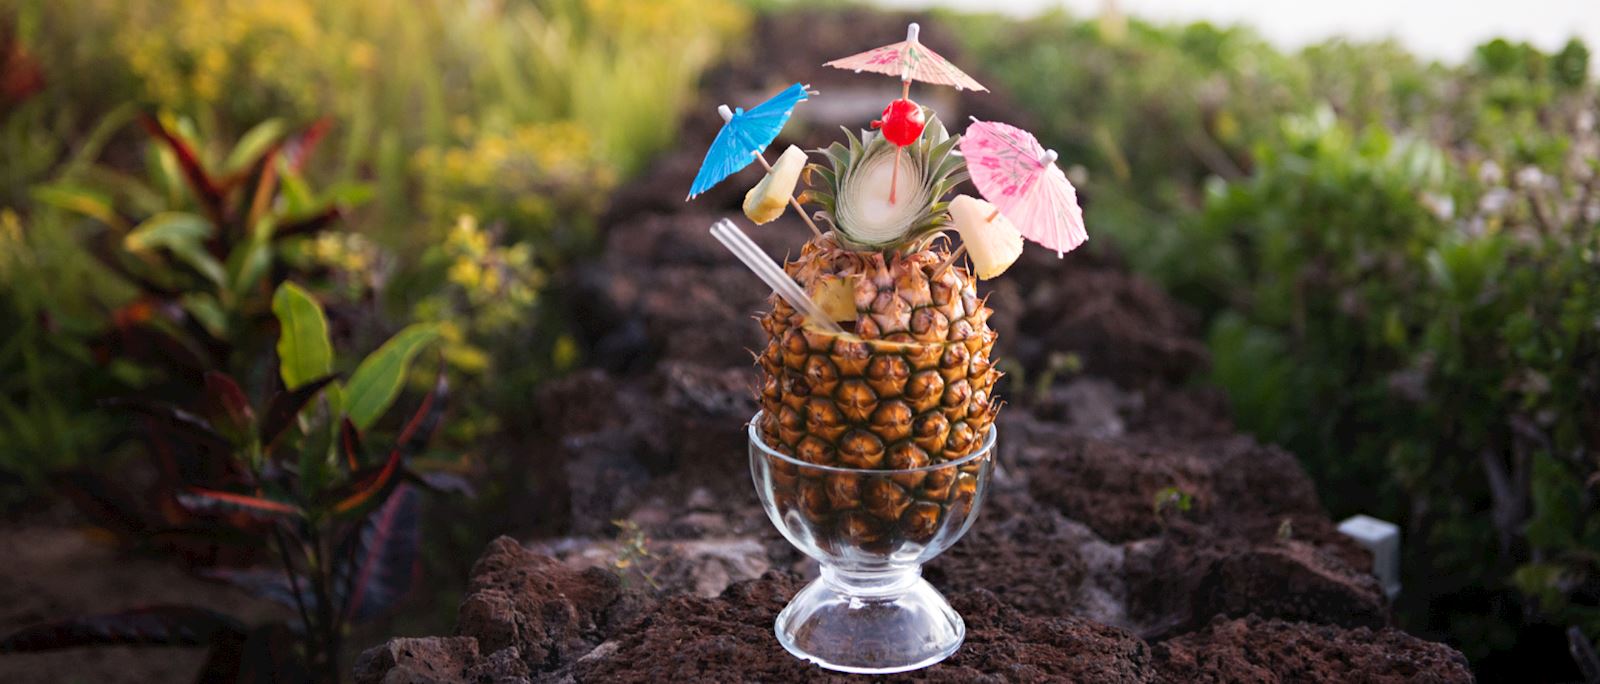 Big pineapple with little umbrellas as decoration